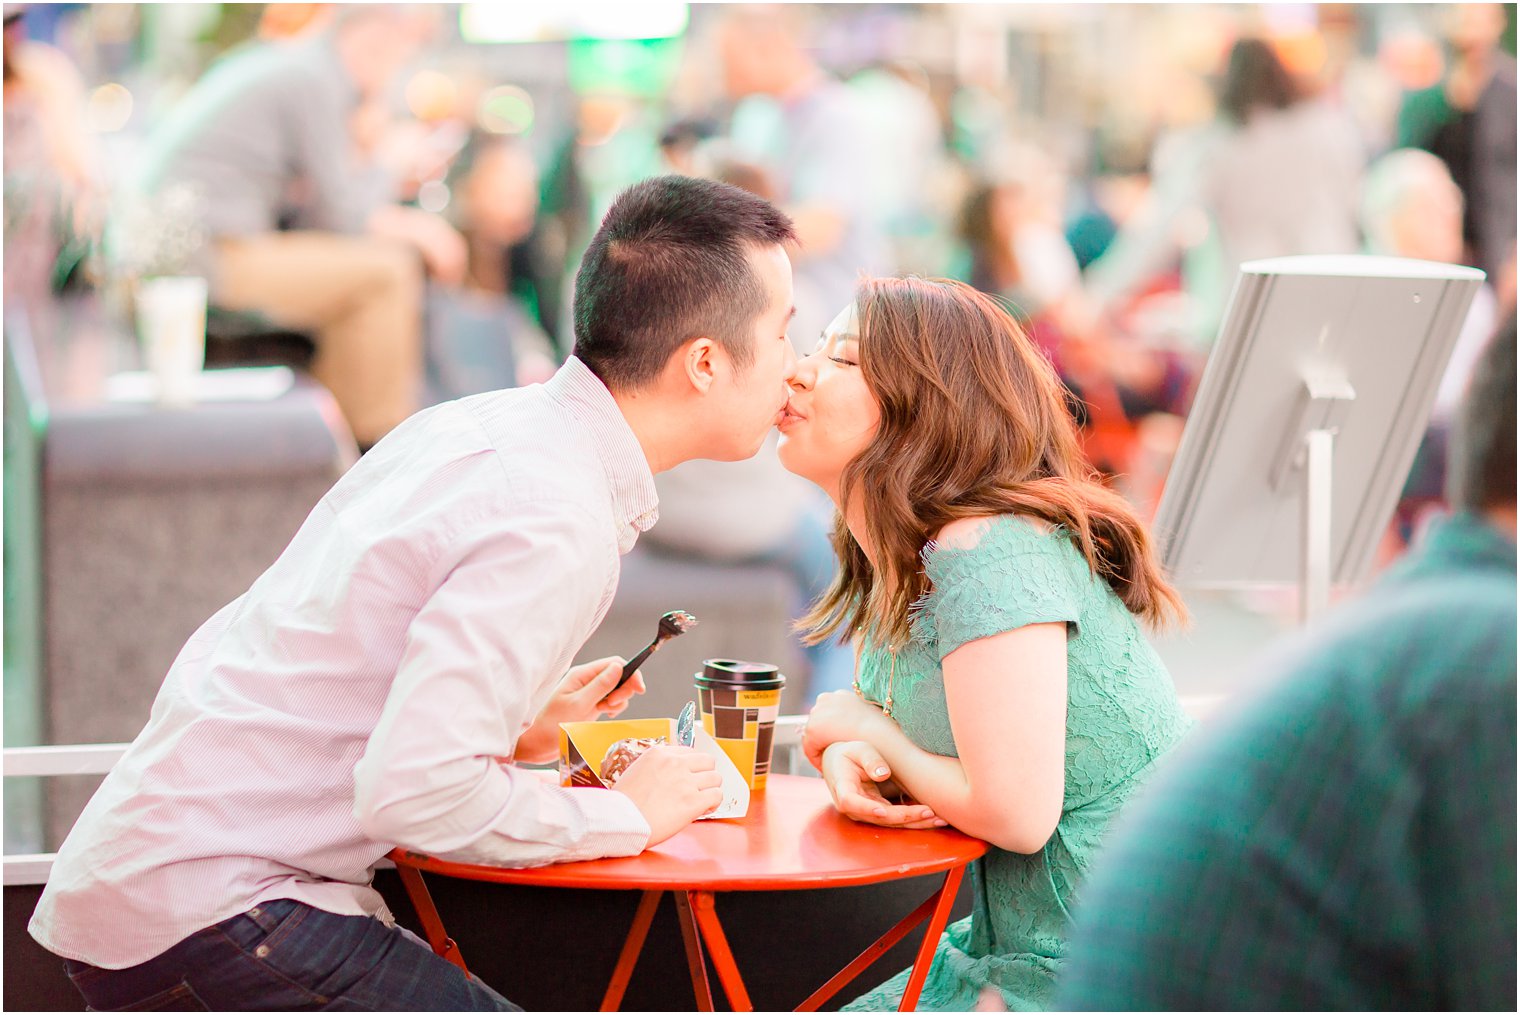 Times Square Engagement Photos by Idalia Photography